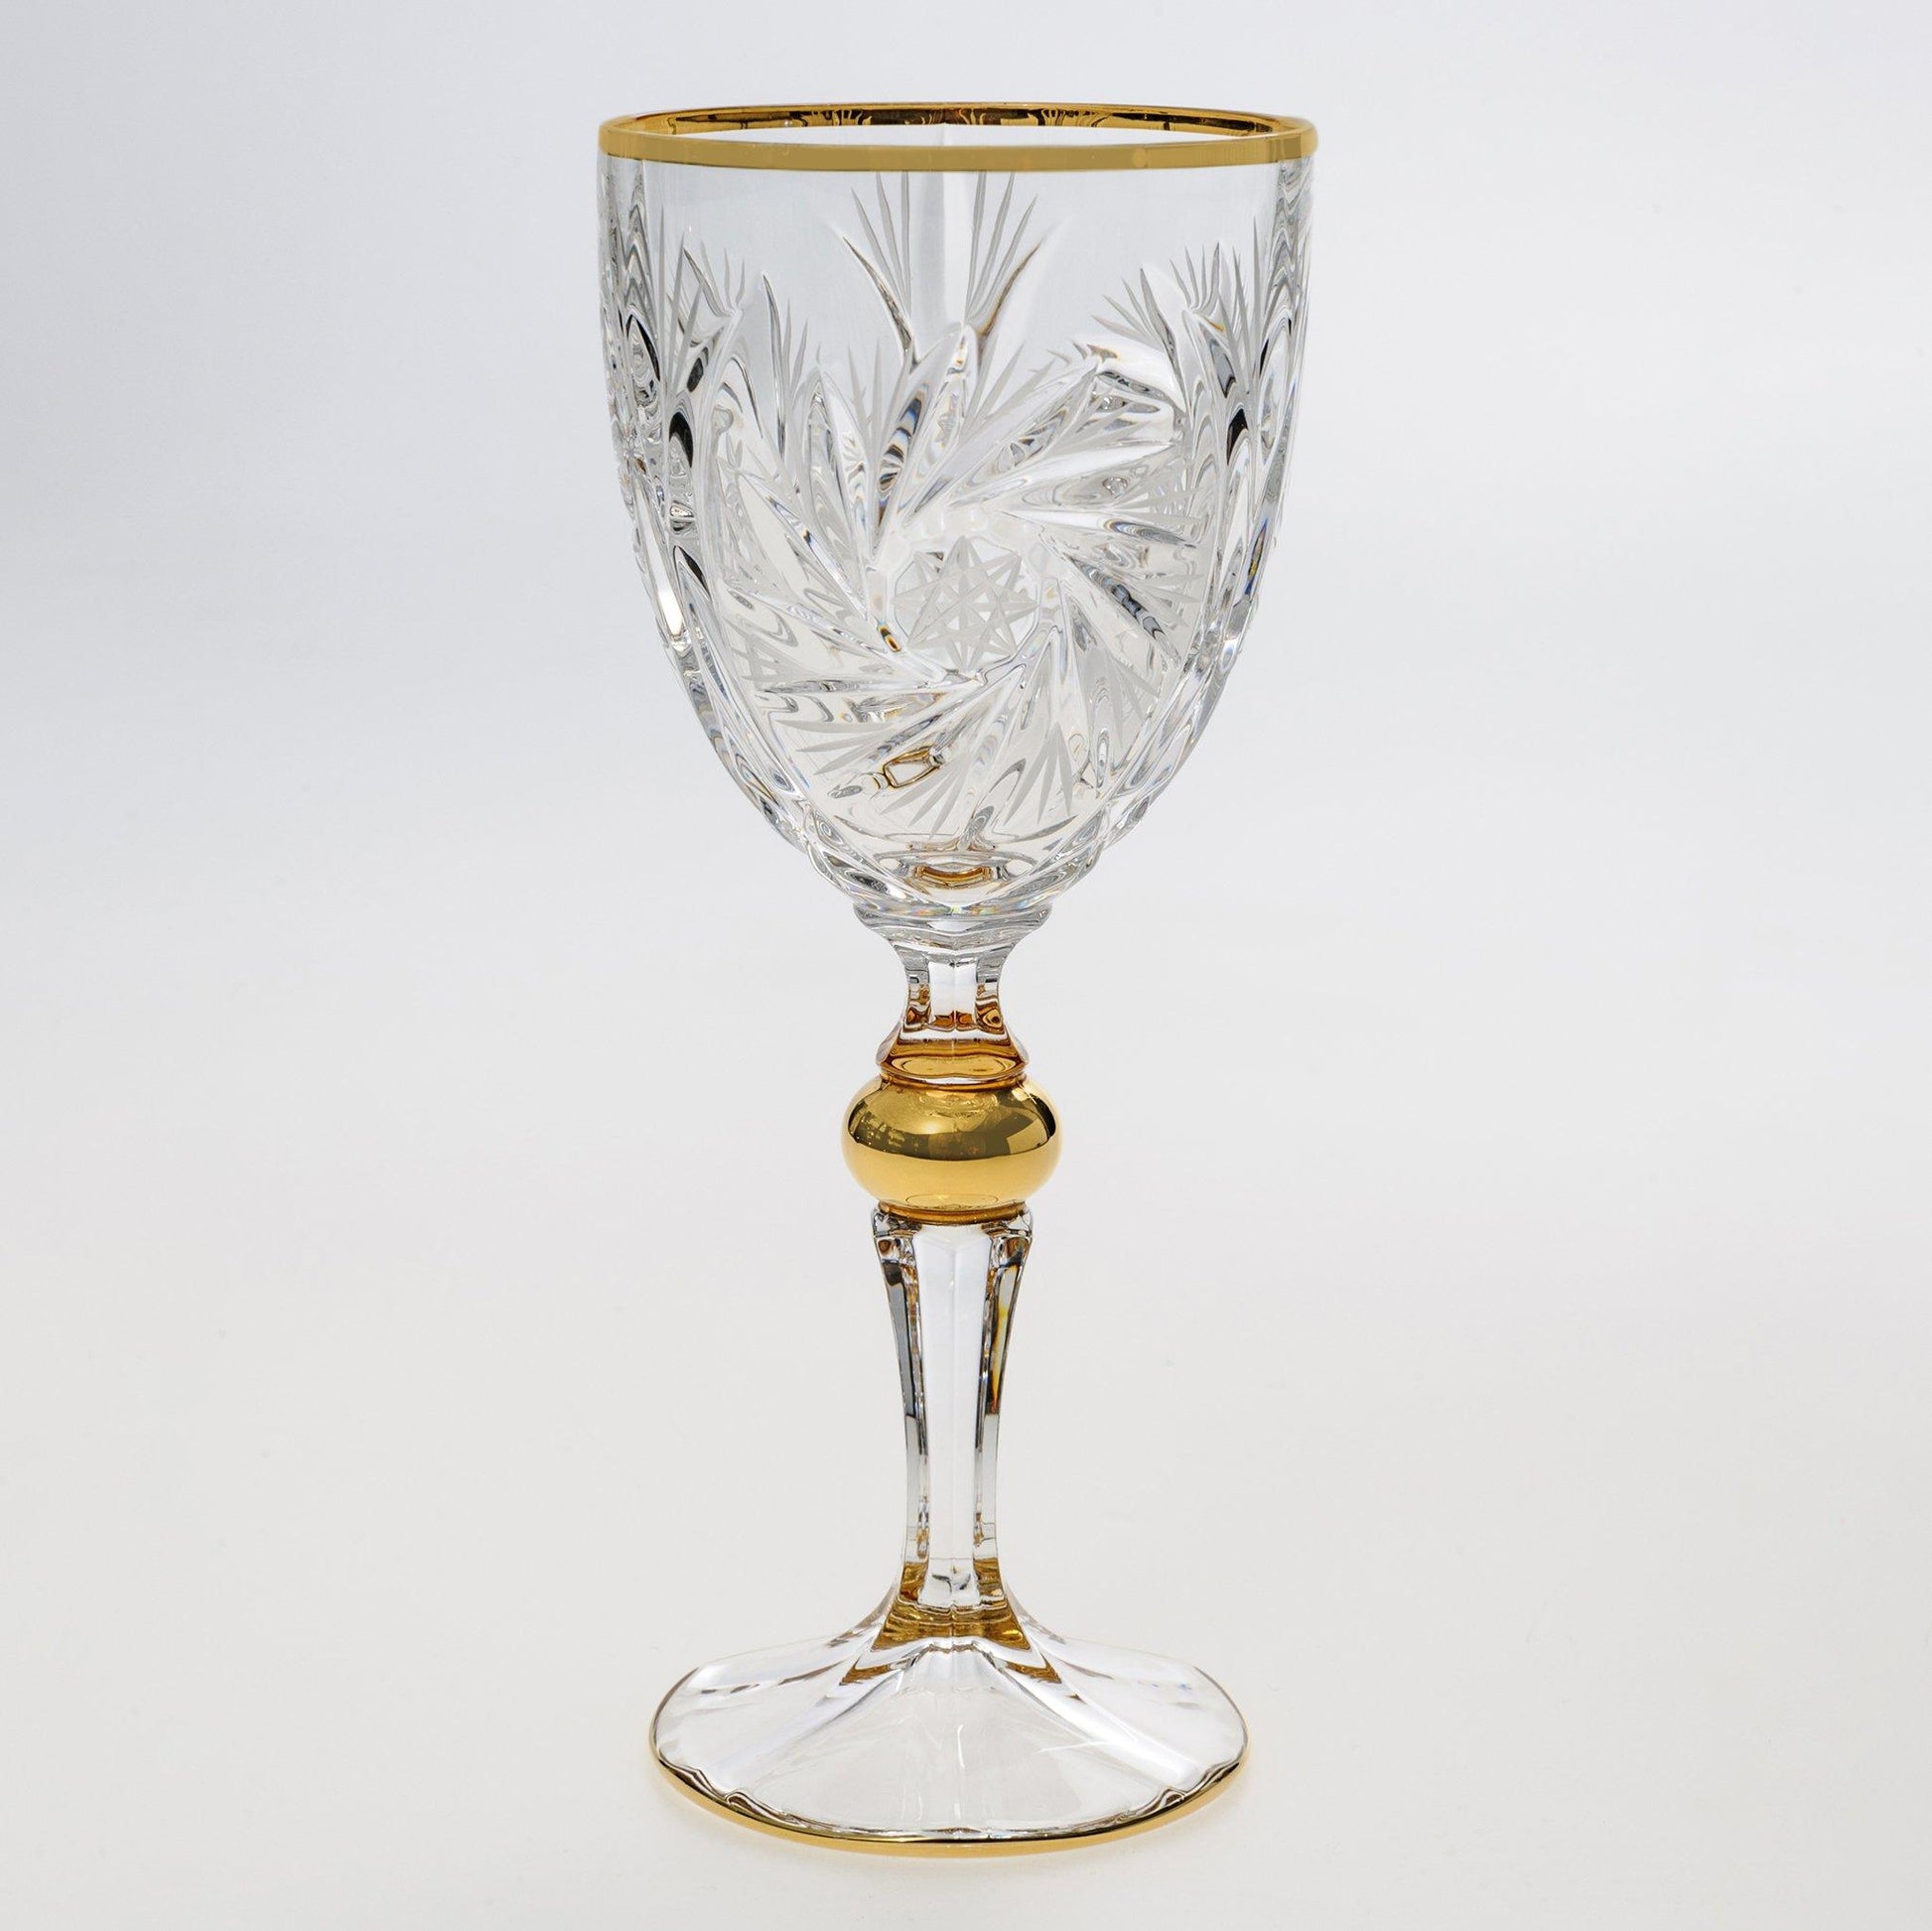 Crystal wine glass with pinwheel design and gold touches